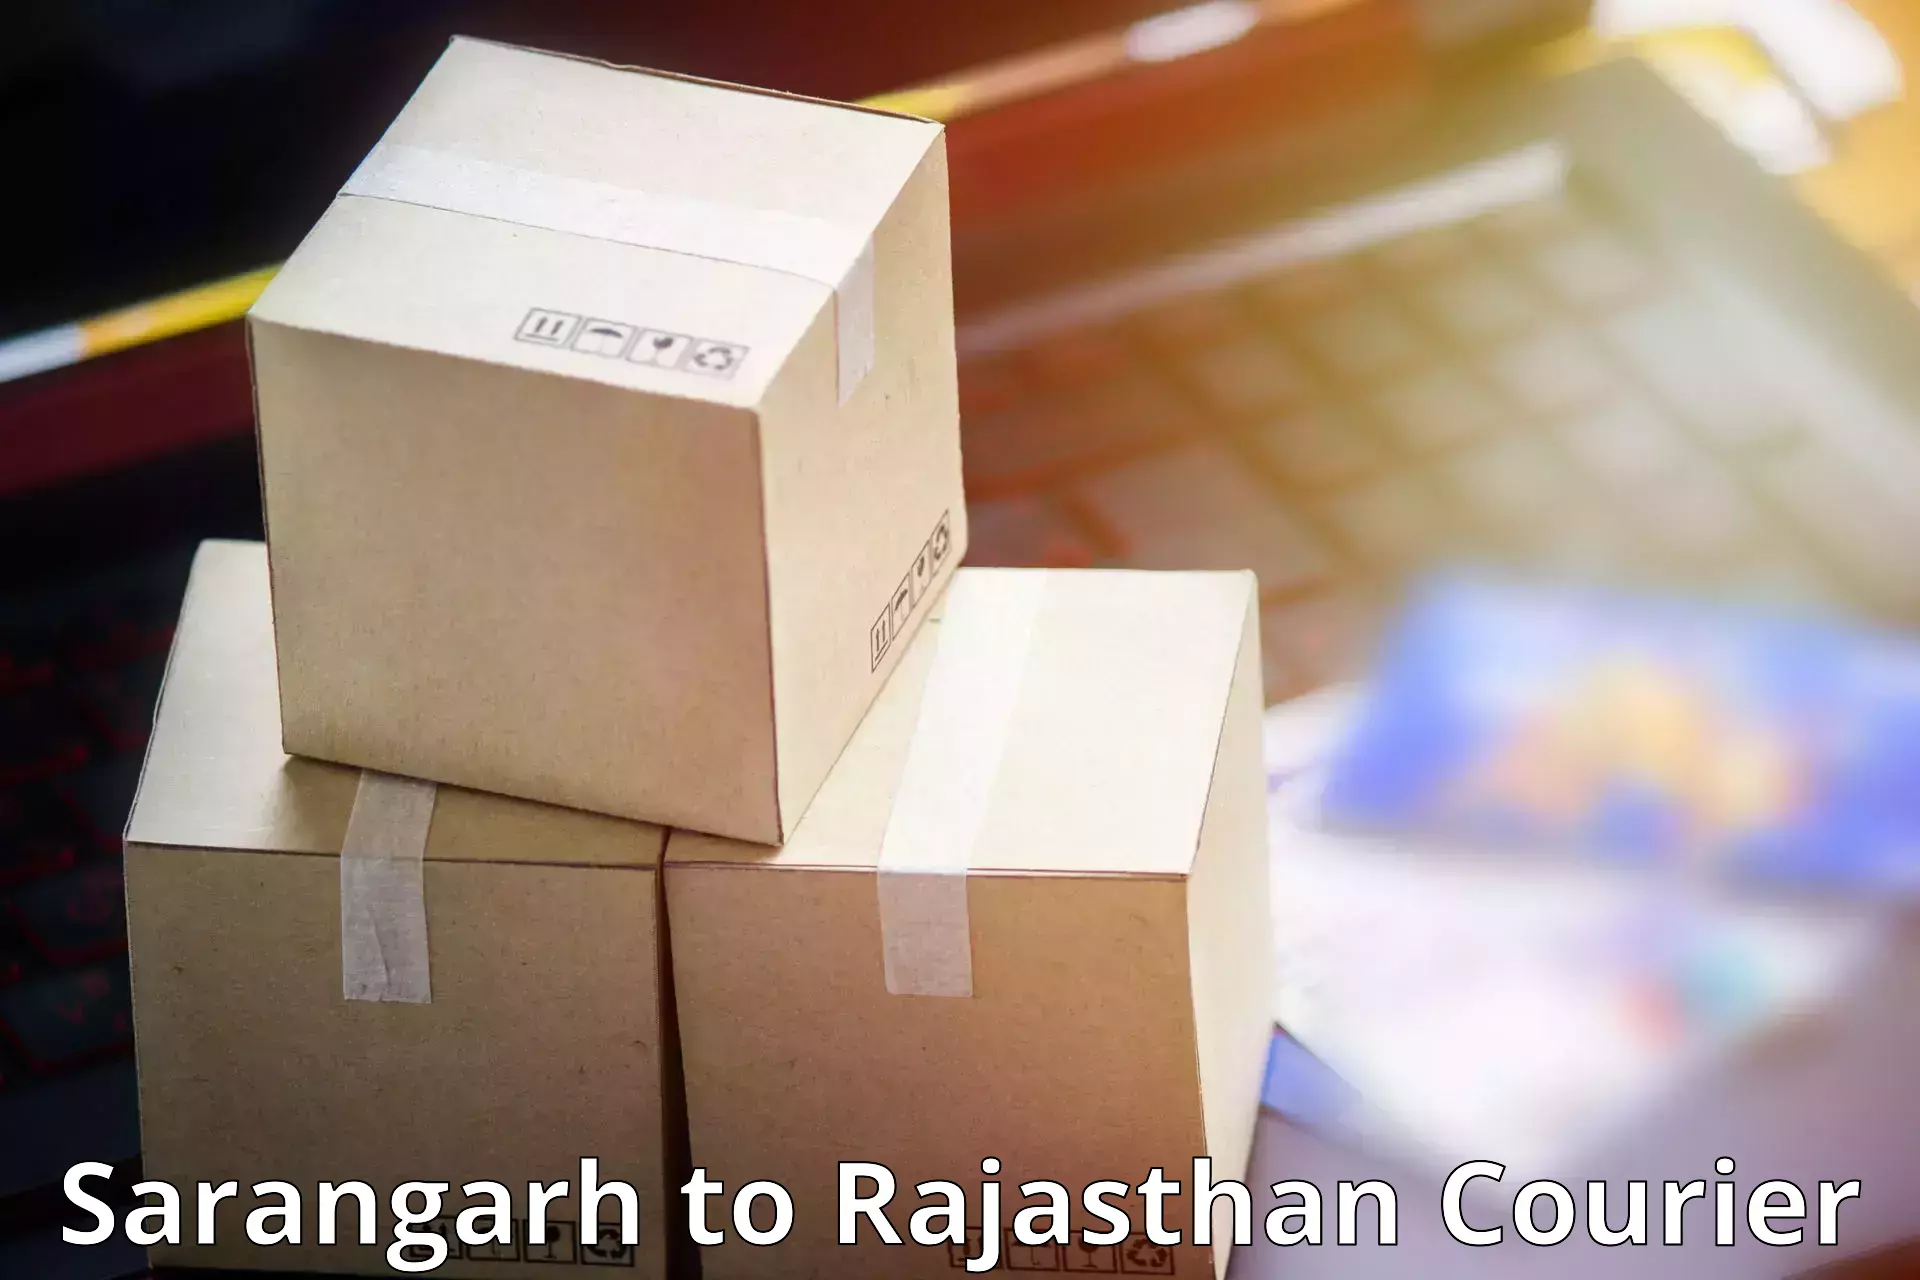 Parcel service for businesses Sarangarh to Piparcity